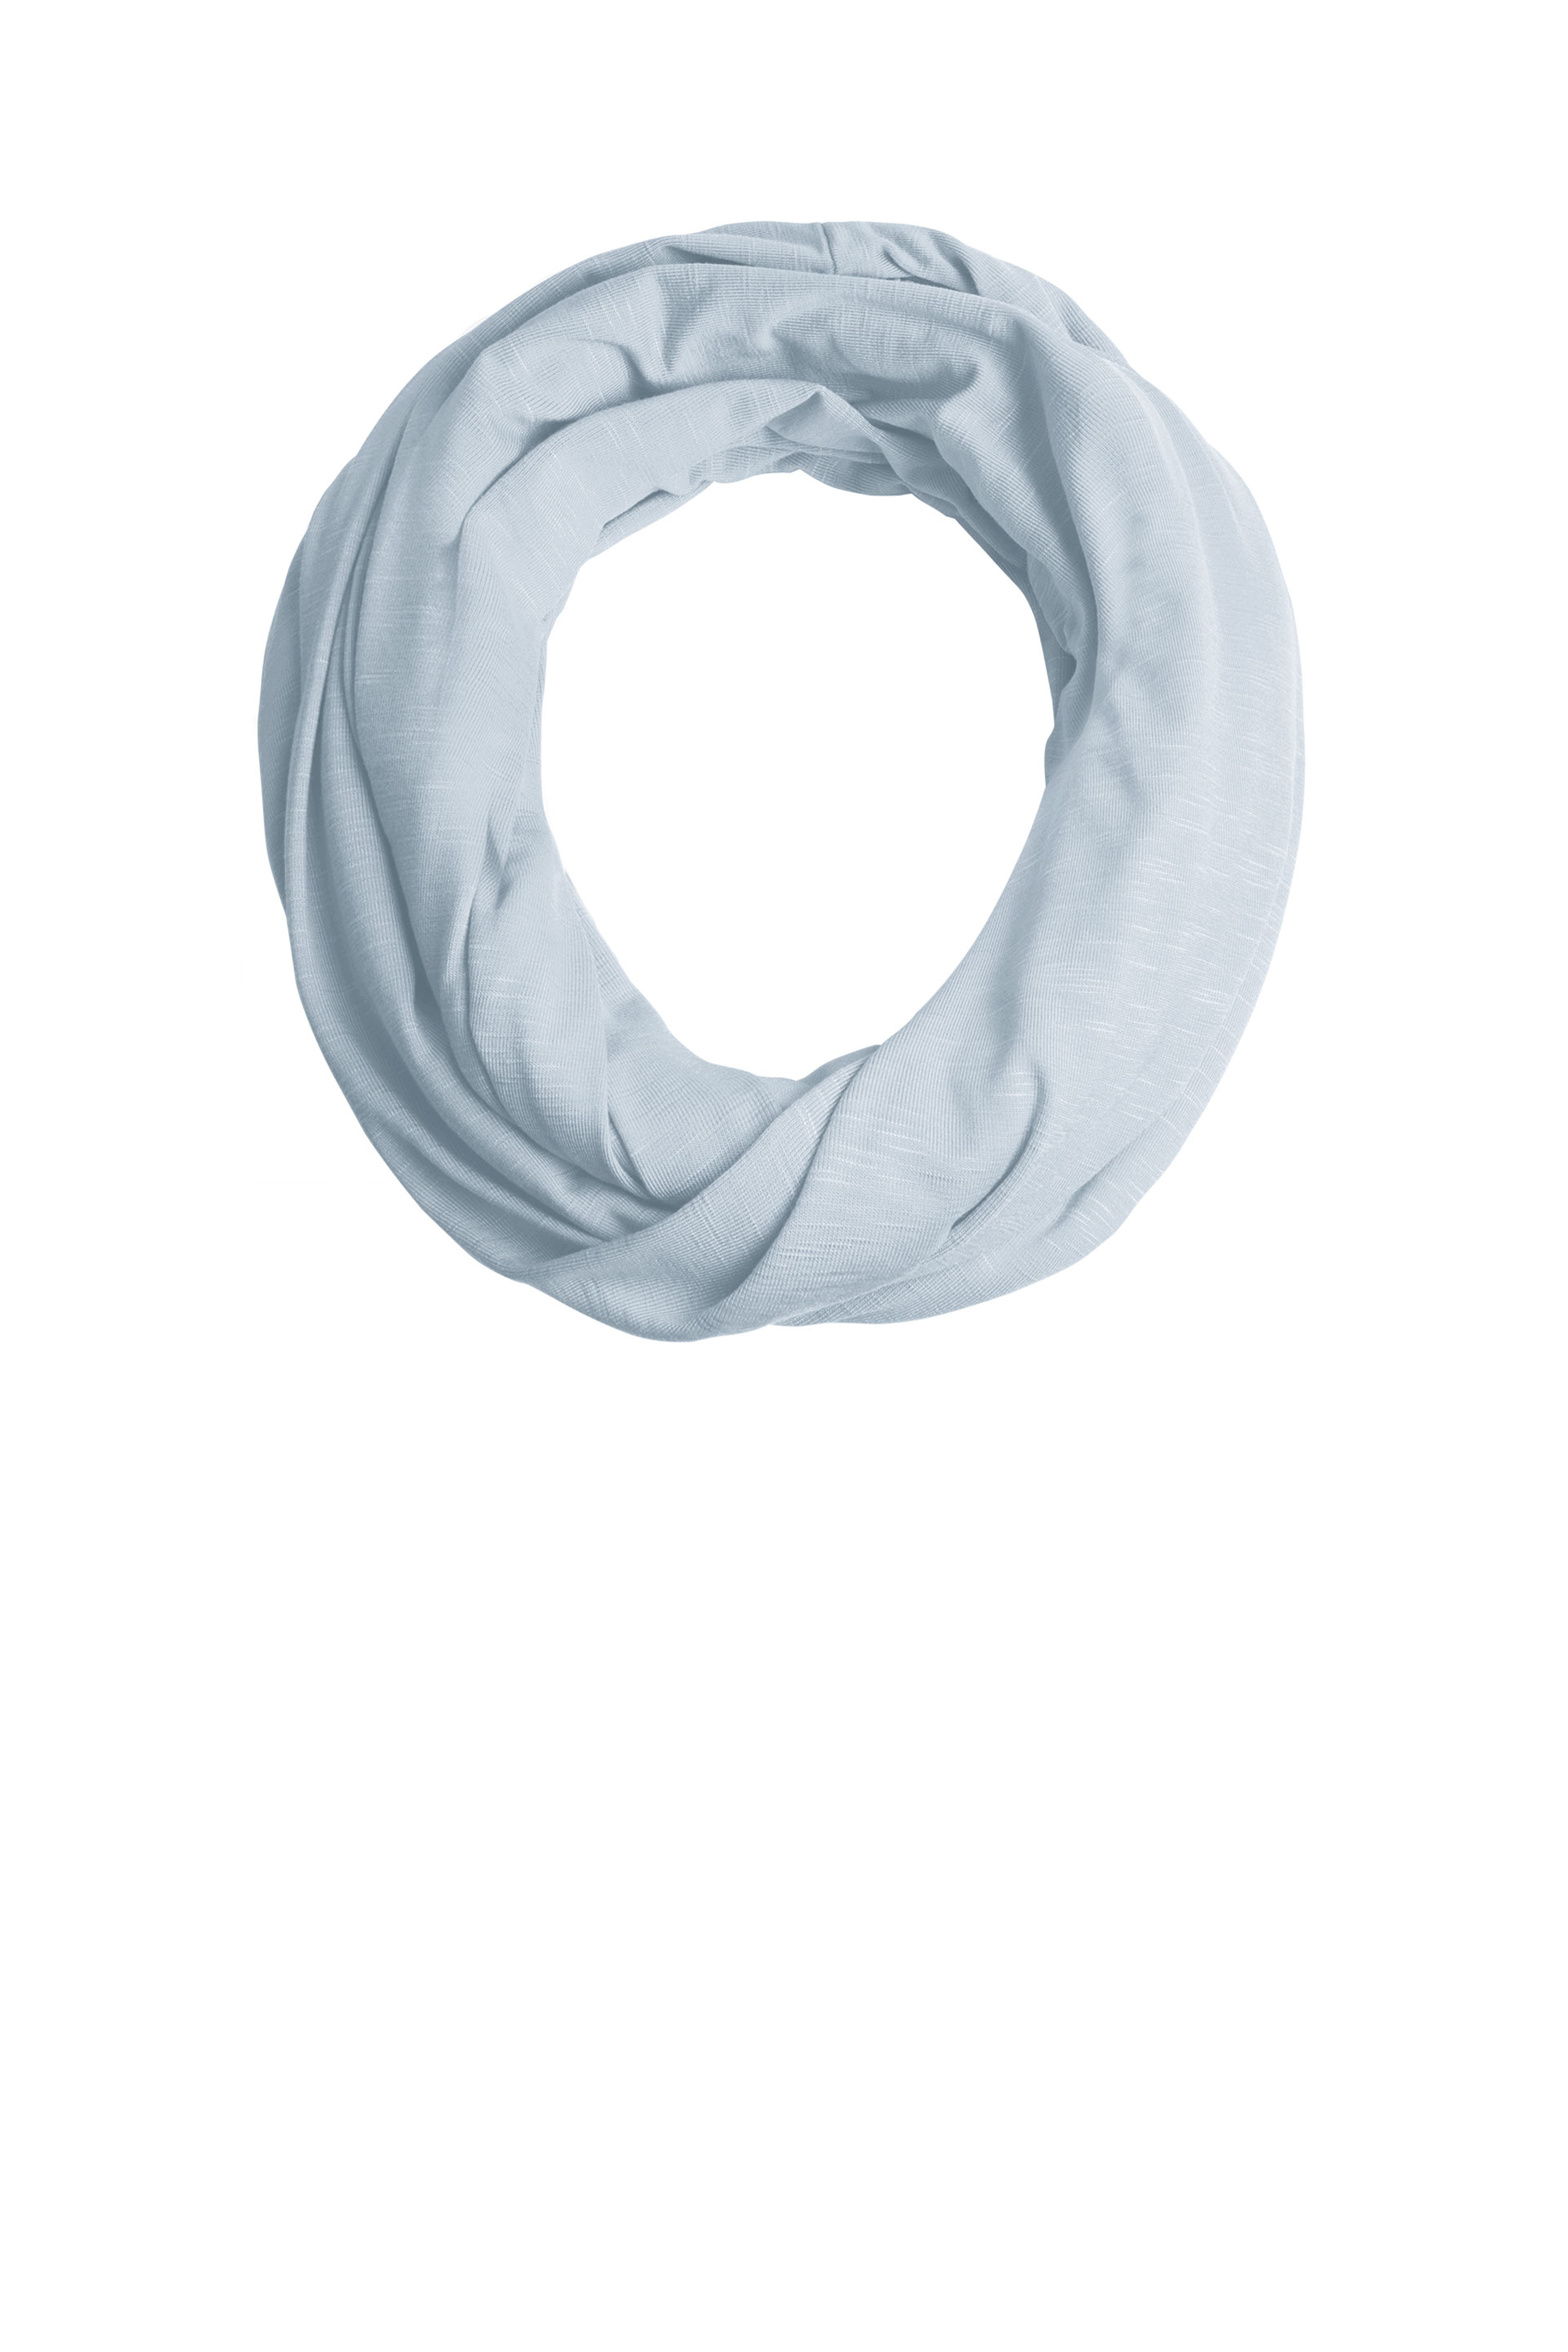 43408_florence_infinity_scarf_silver_new.jpg